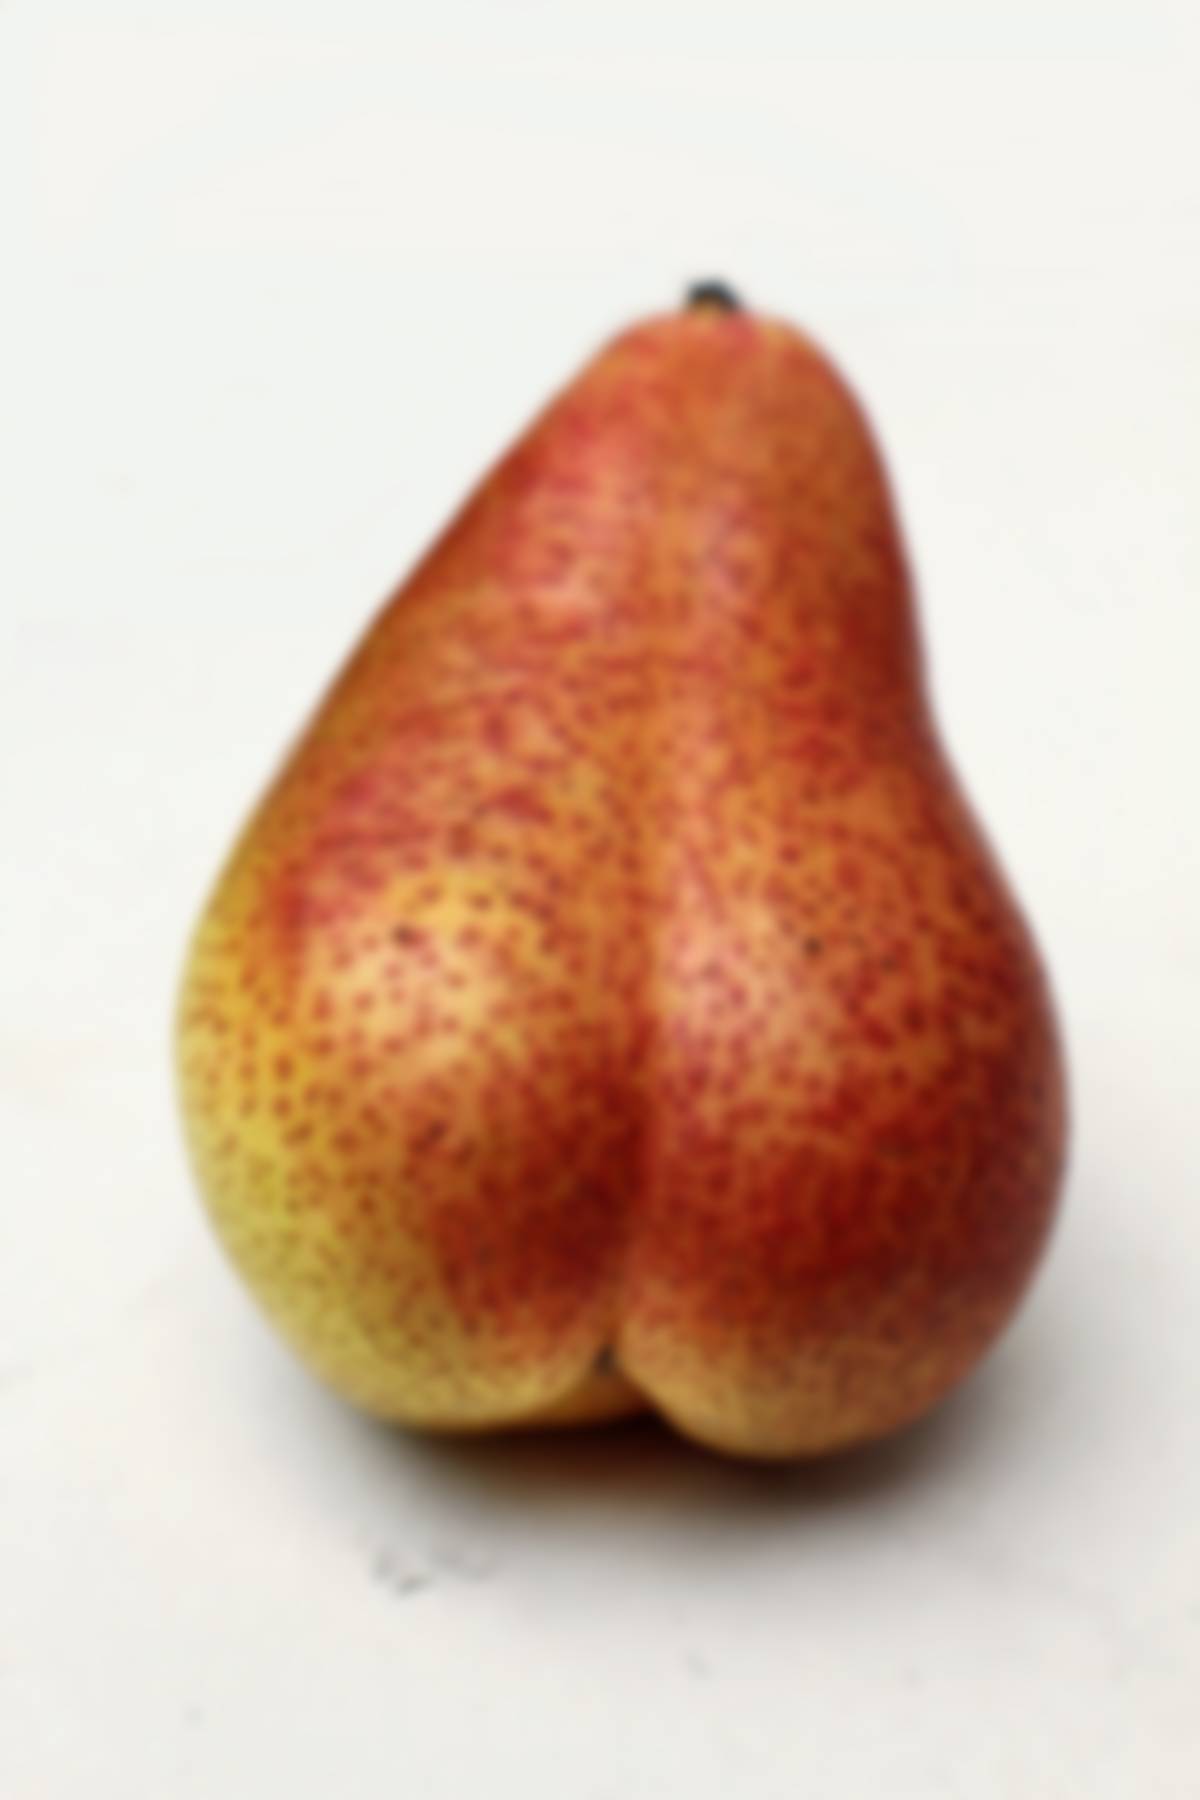 pear that looks like a butt